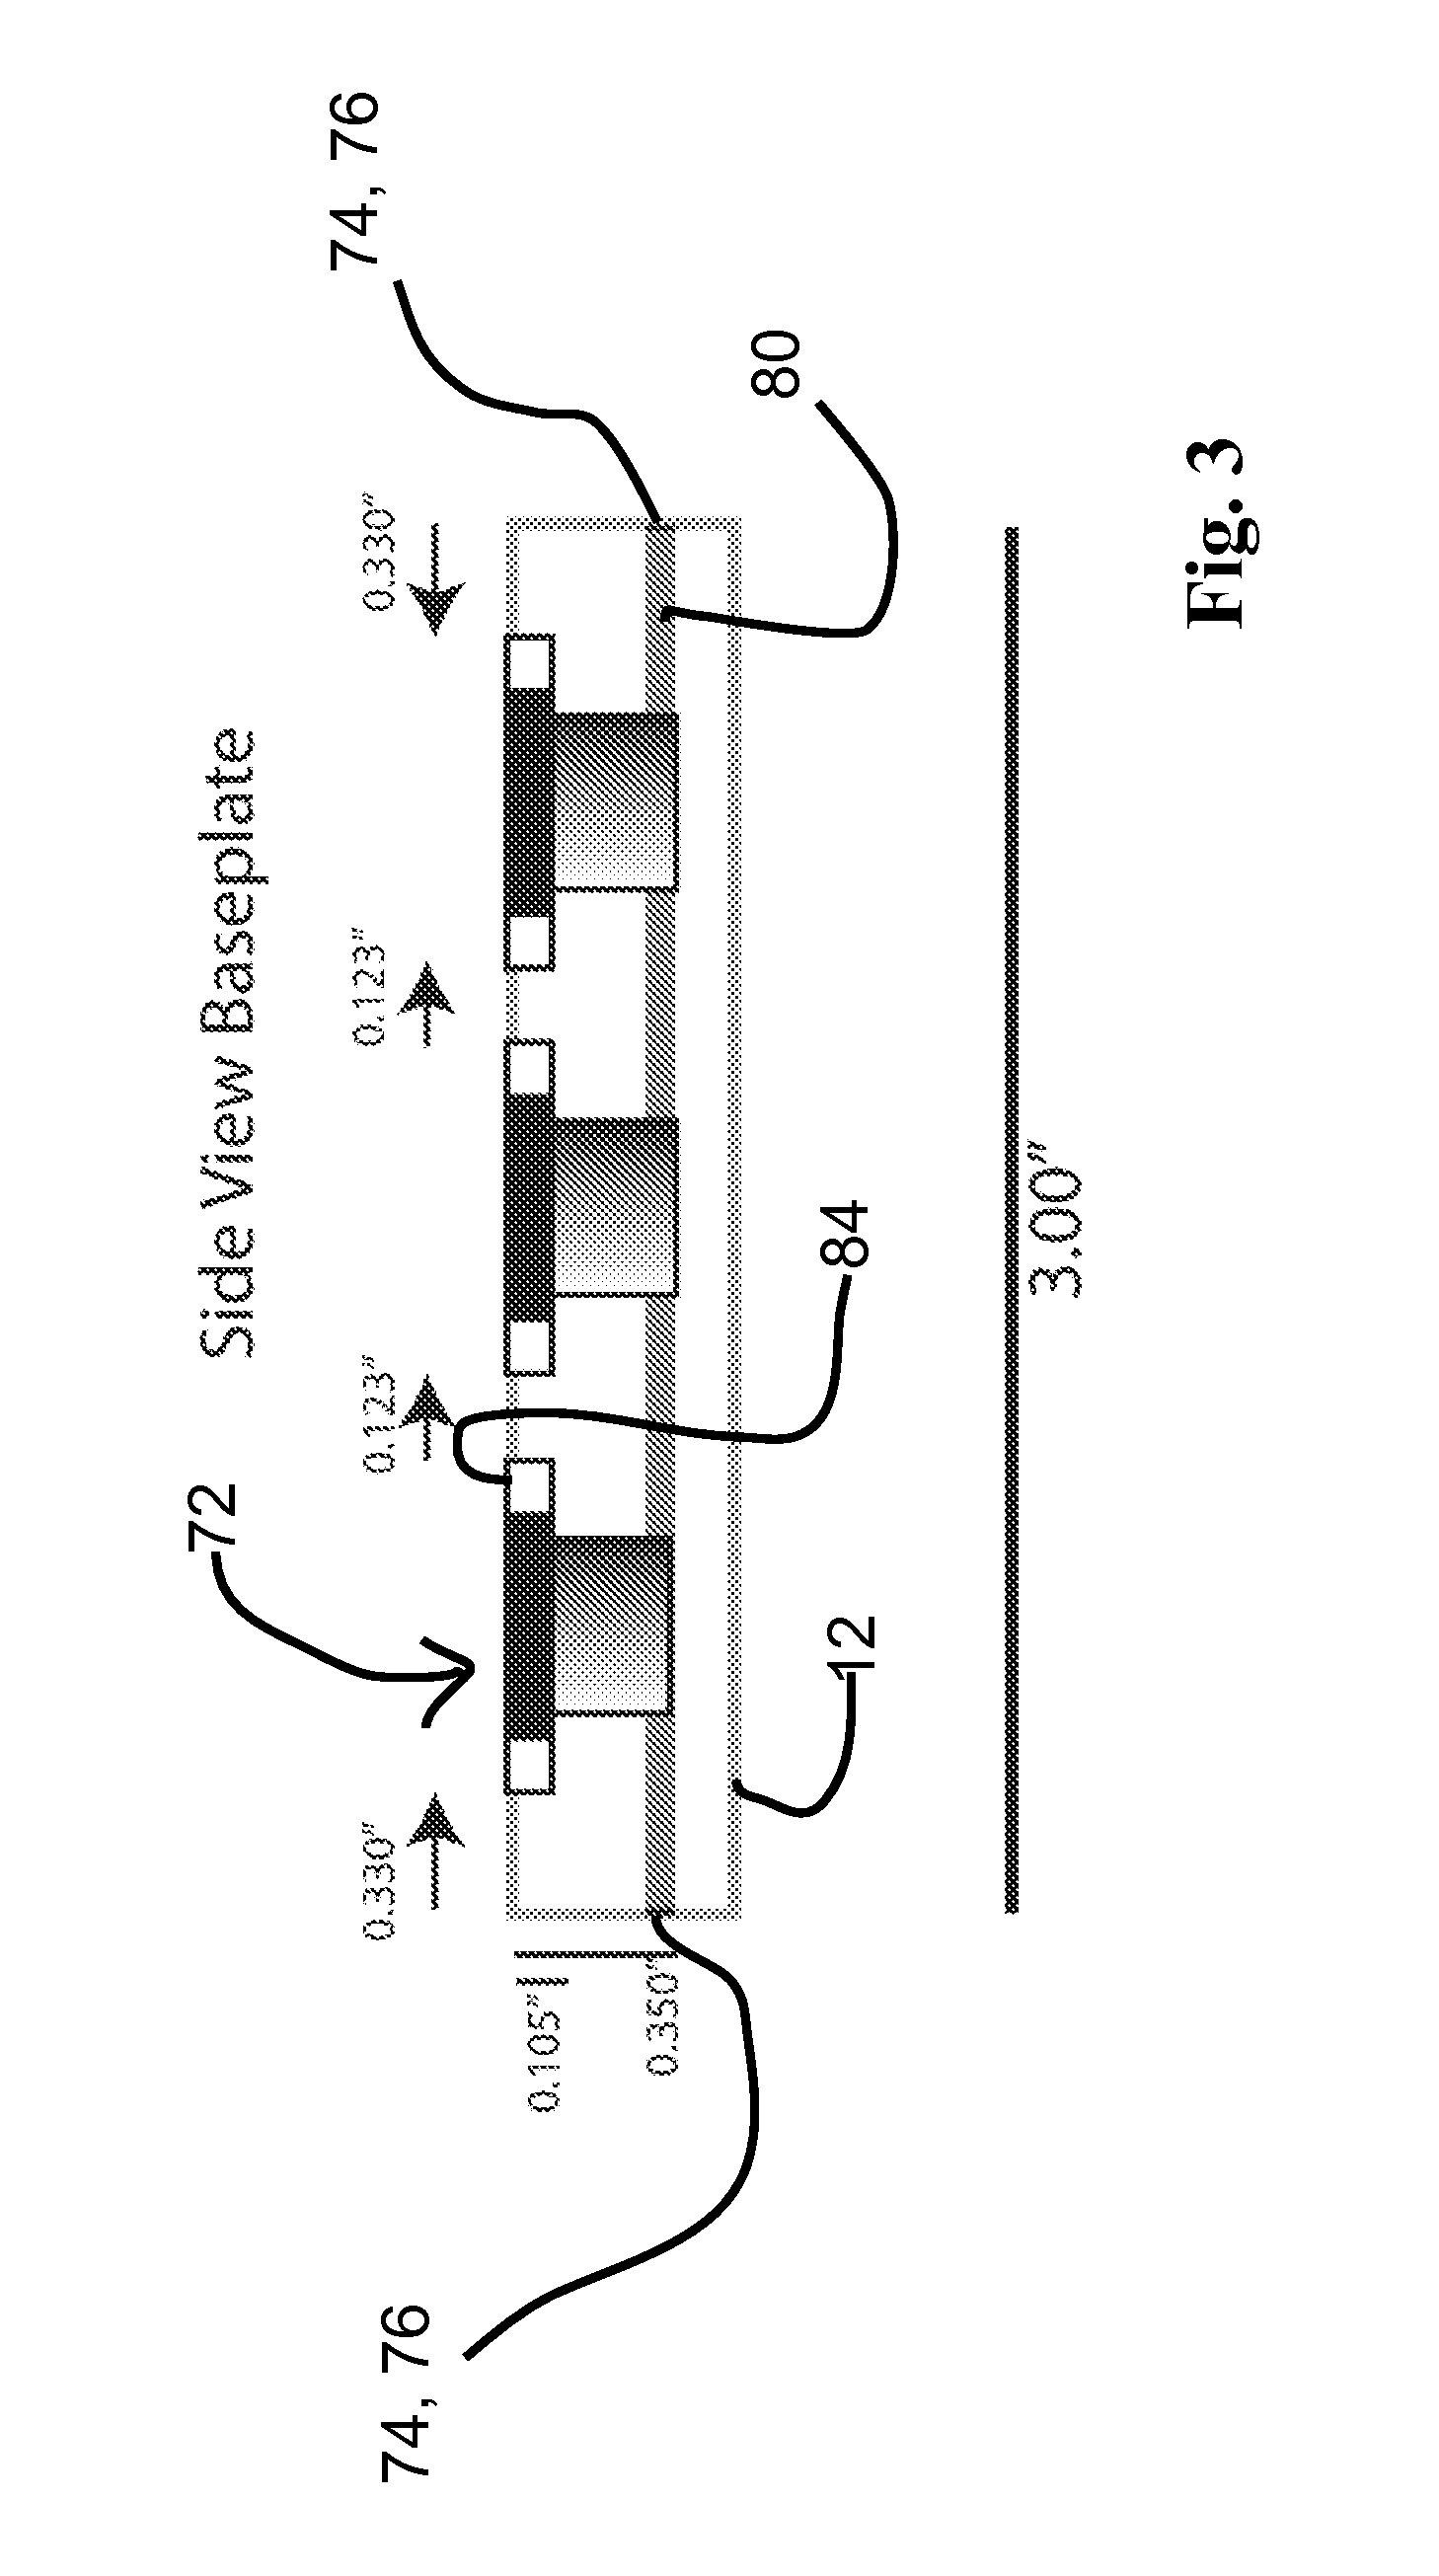 Hybrid linear actuator controlled hydraulic cell stretching